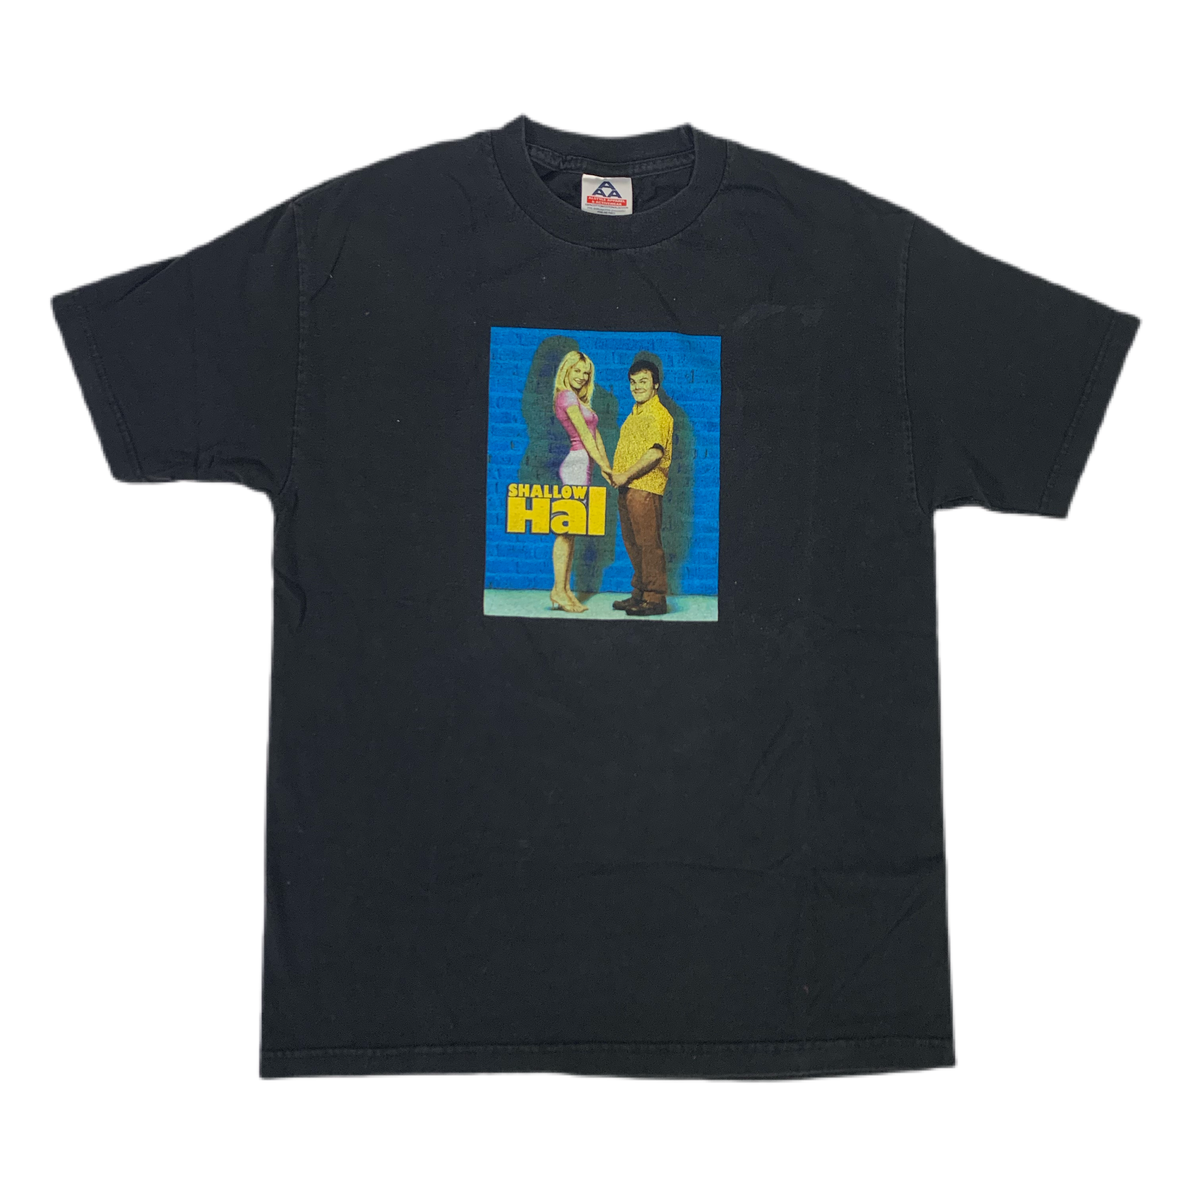 Vintage Shallow Hal &quot;Hollywood Video&quot; T-Shirt